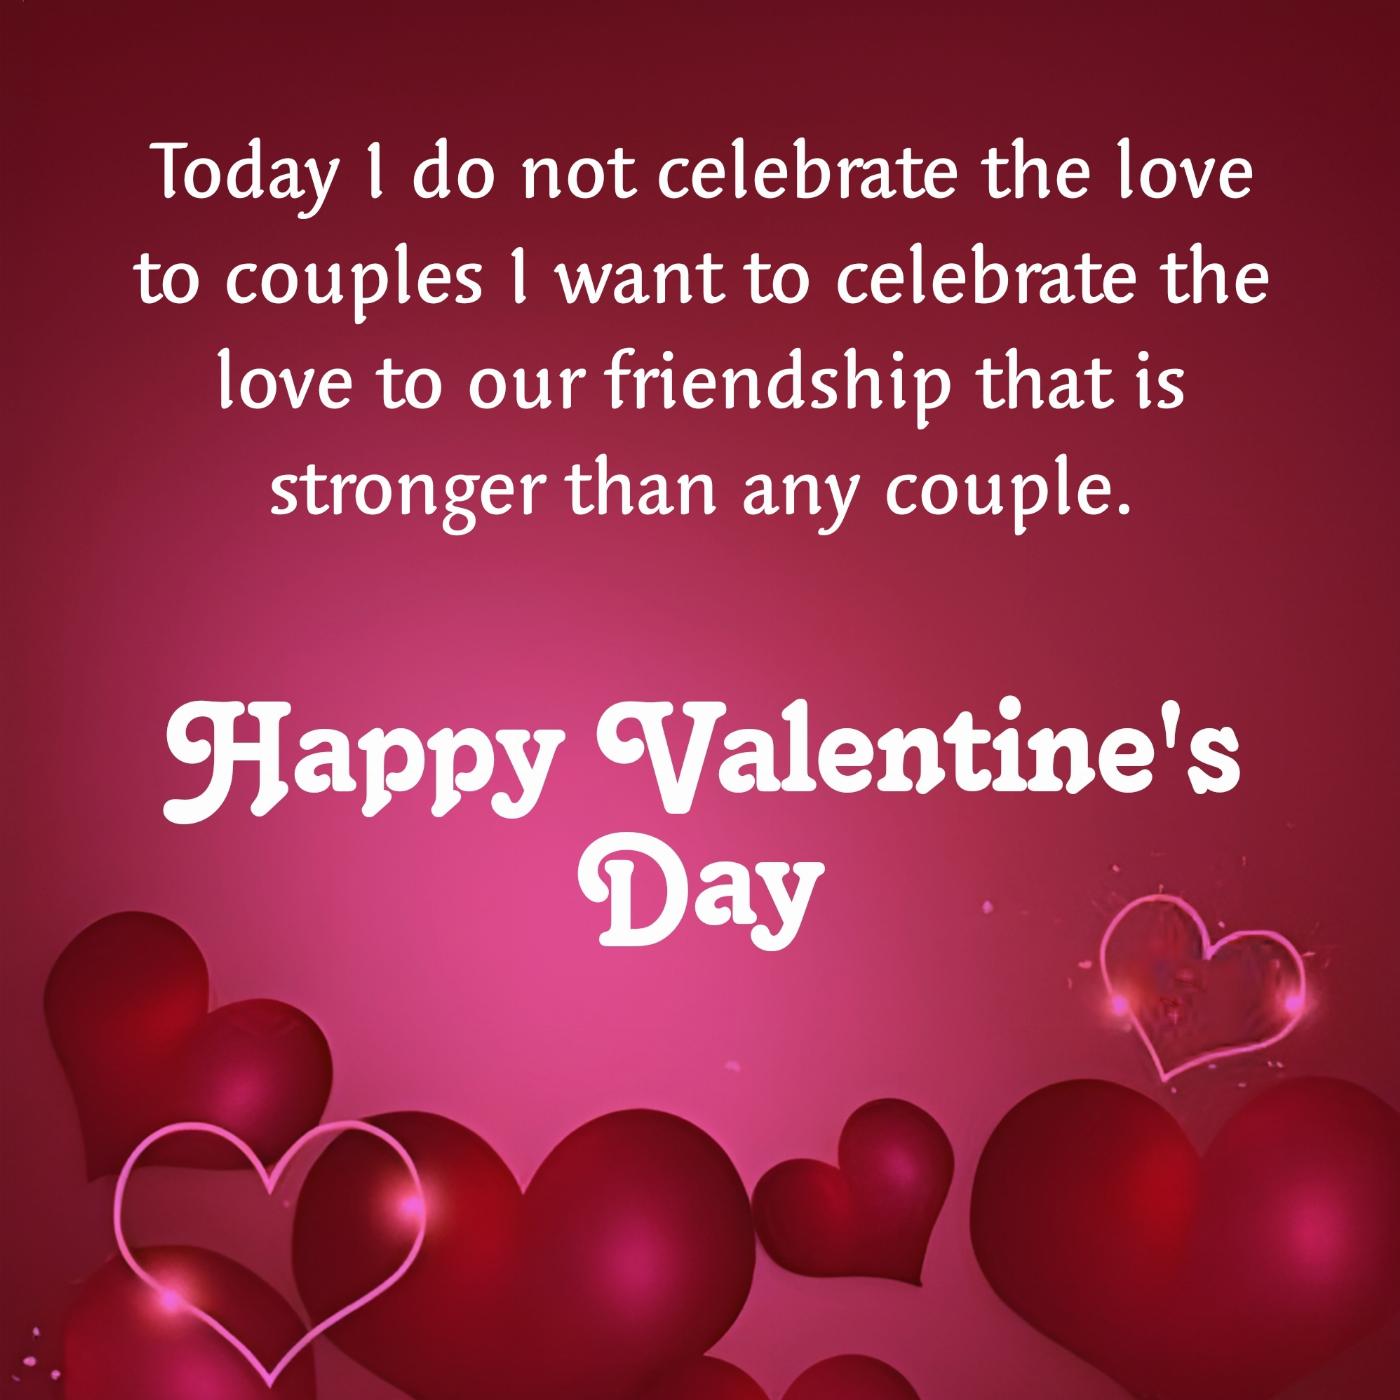 Today I do not celebrate the love to couples